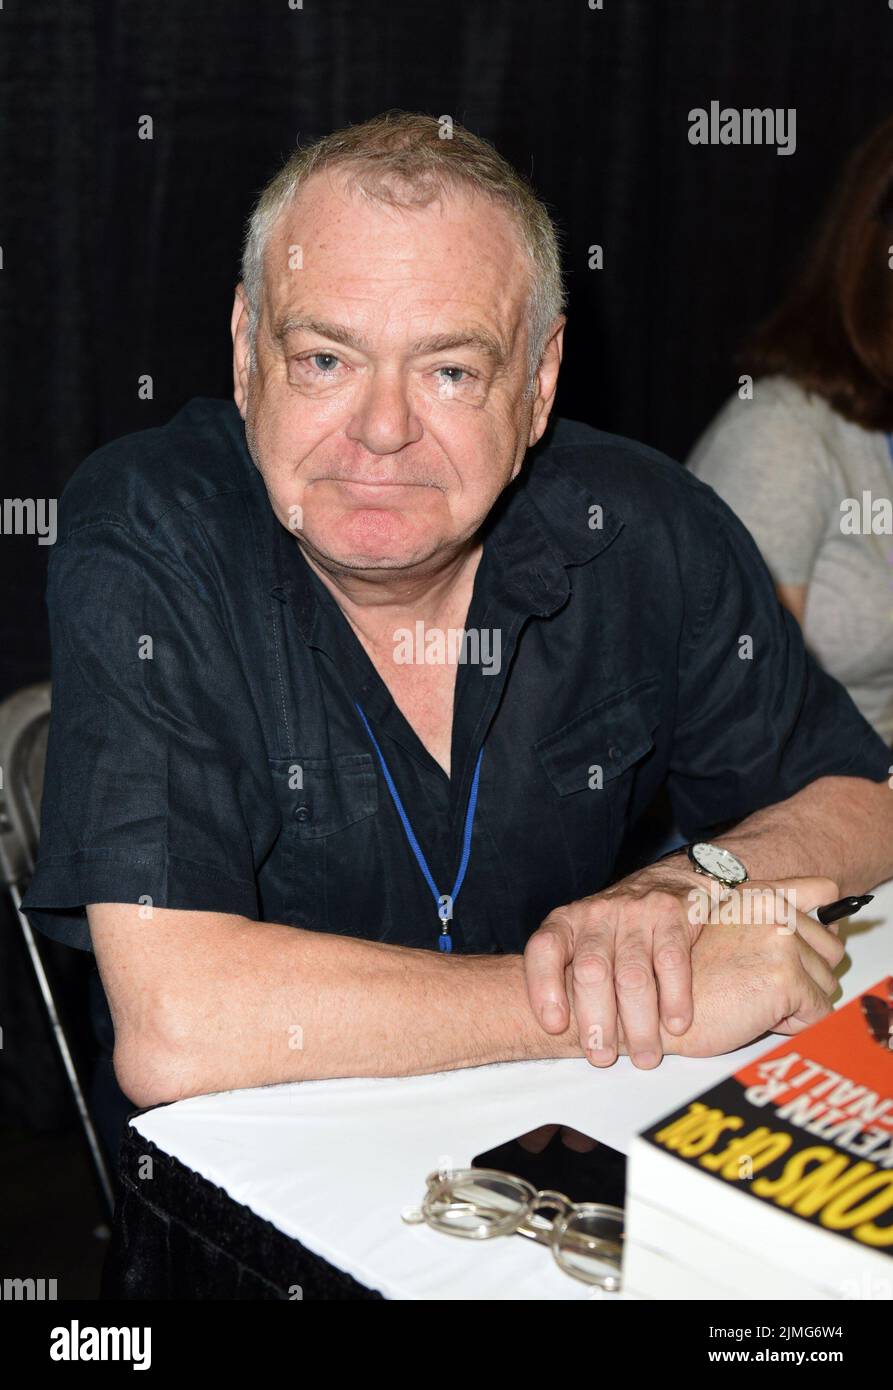 Knoxville, TN, USA. 5th Aug, 2022. Kevin McNally in attendance for Fanboy Expo 2022, Knoxville Convention Center, Knoxville, TN August 5, 2022. Credit: Derek Storm/Everett Collection/Alamy Live News Stock Photo